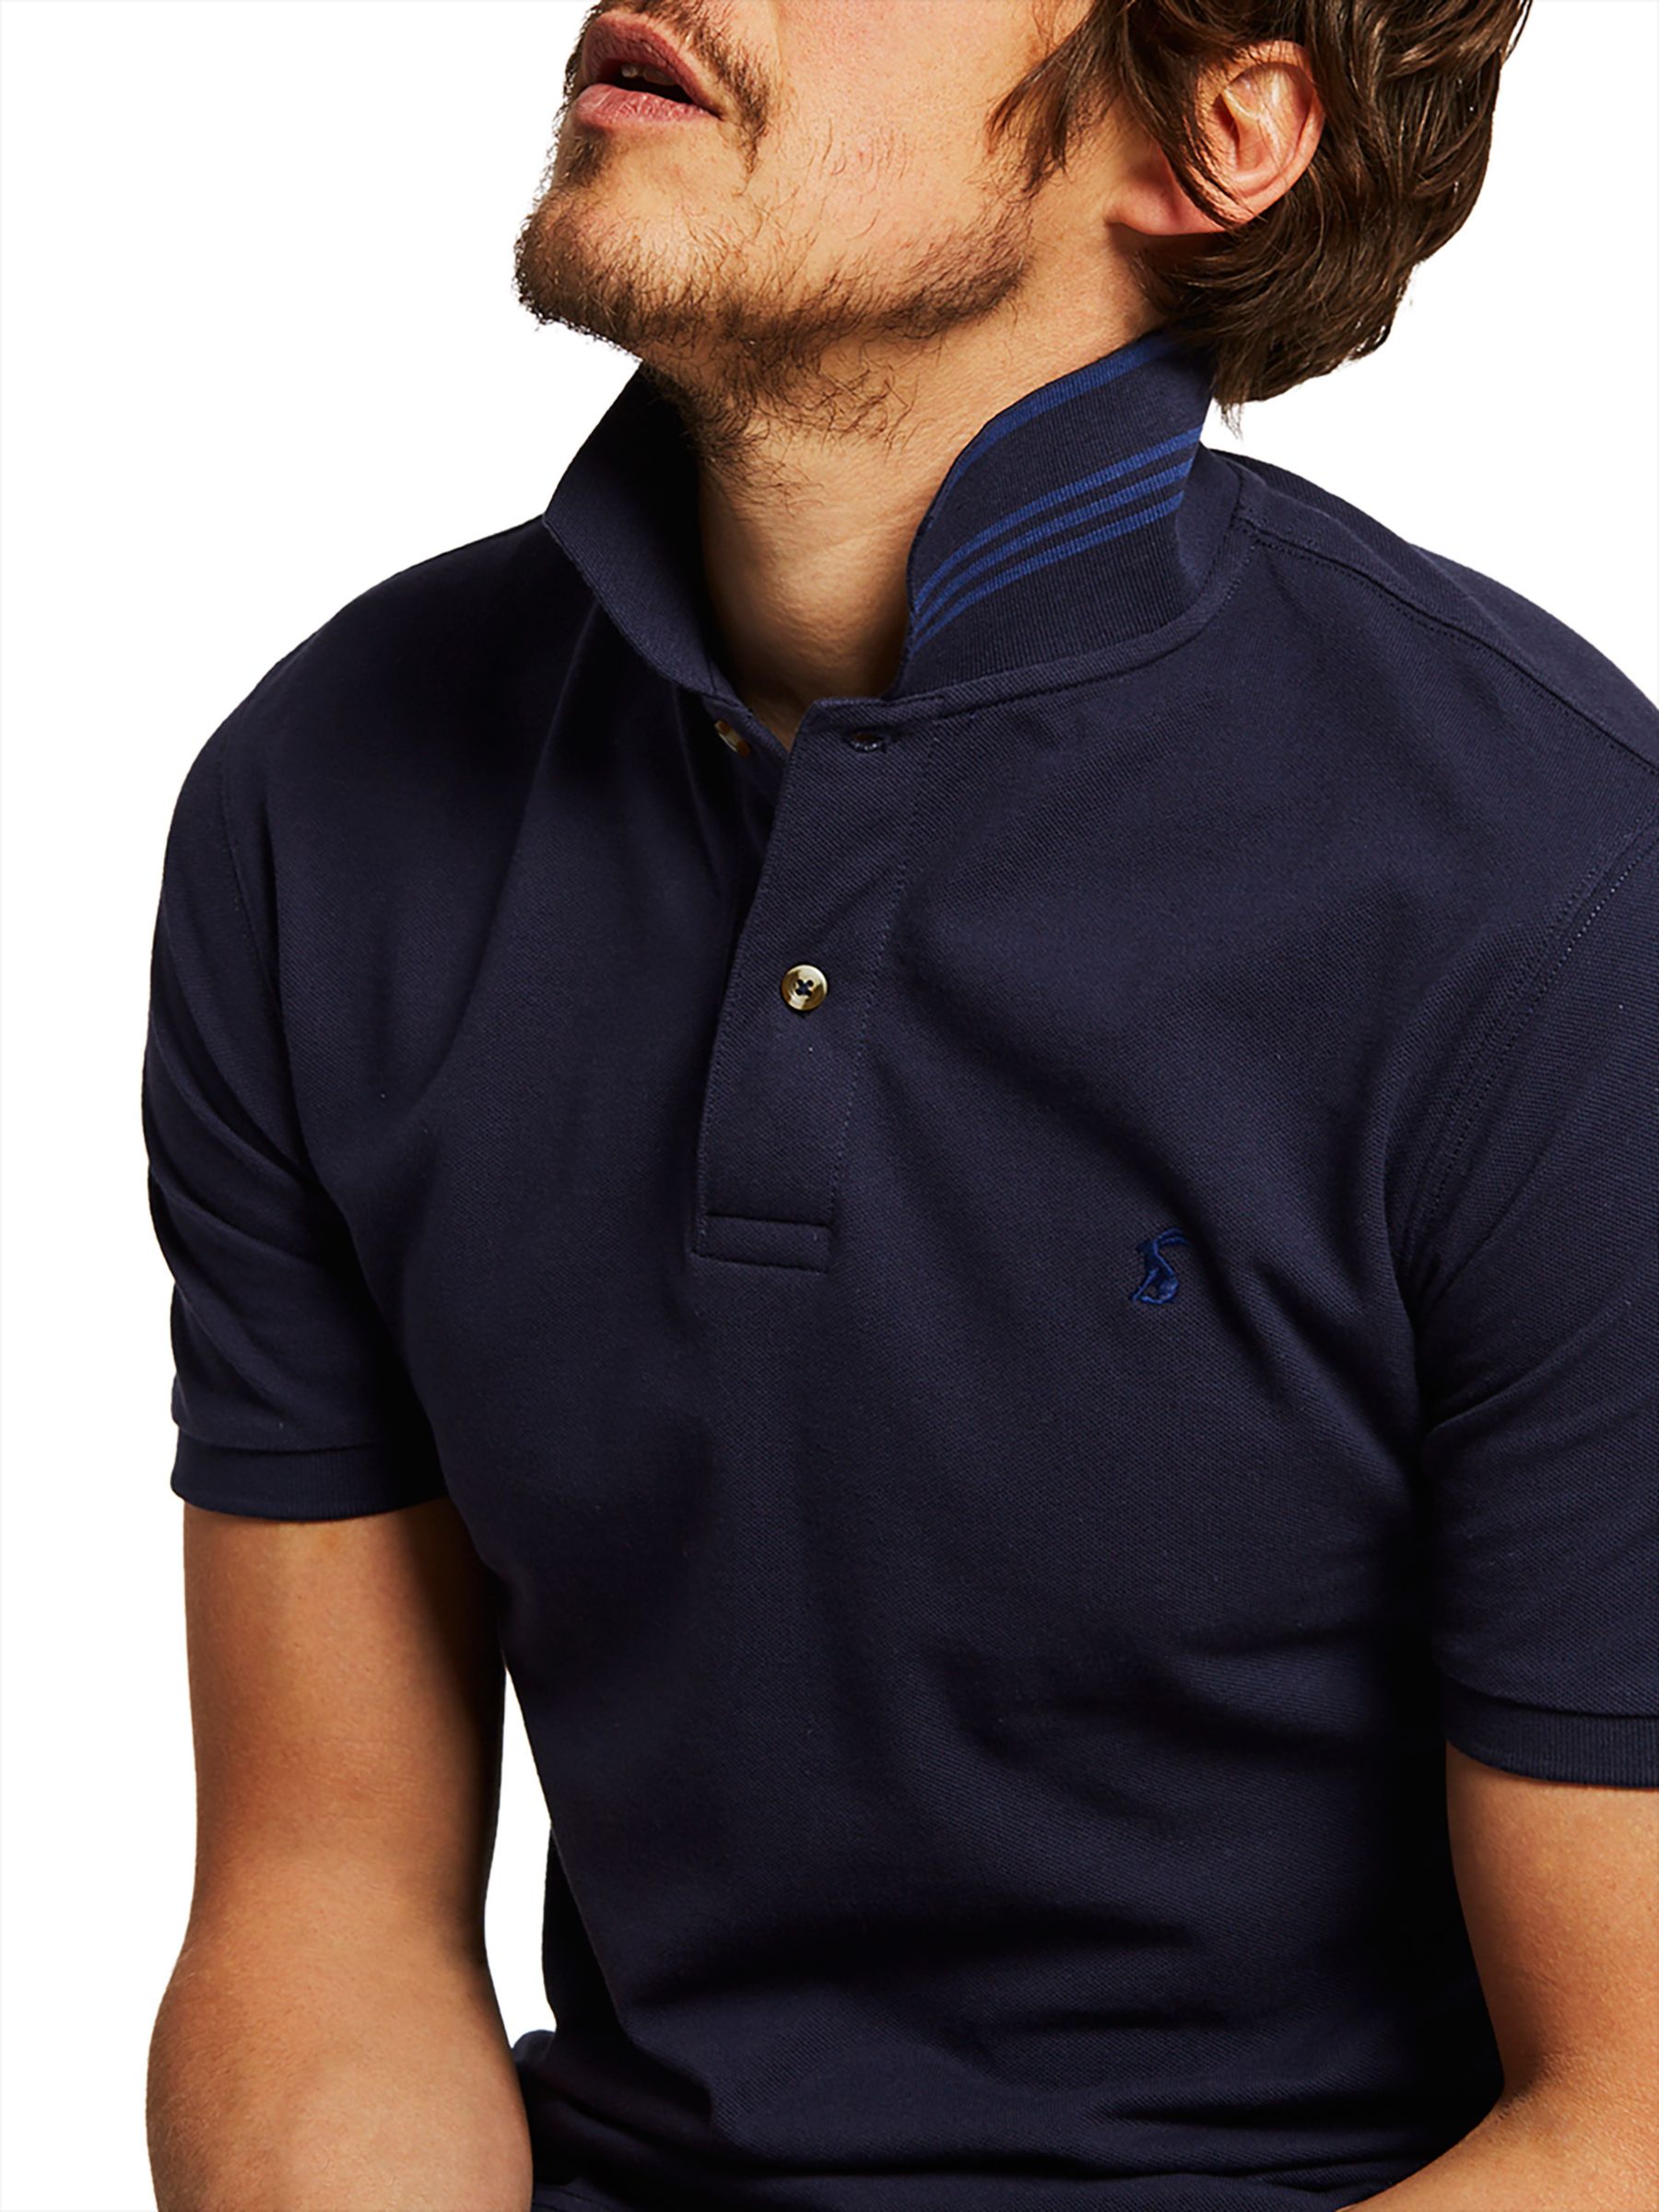 Joules Woody Classic Fit Polo Shirt